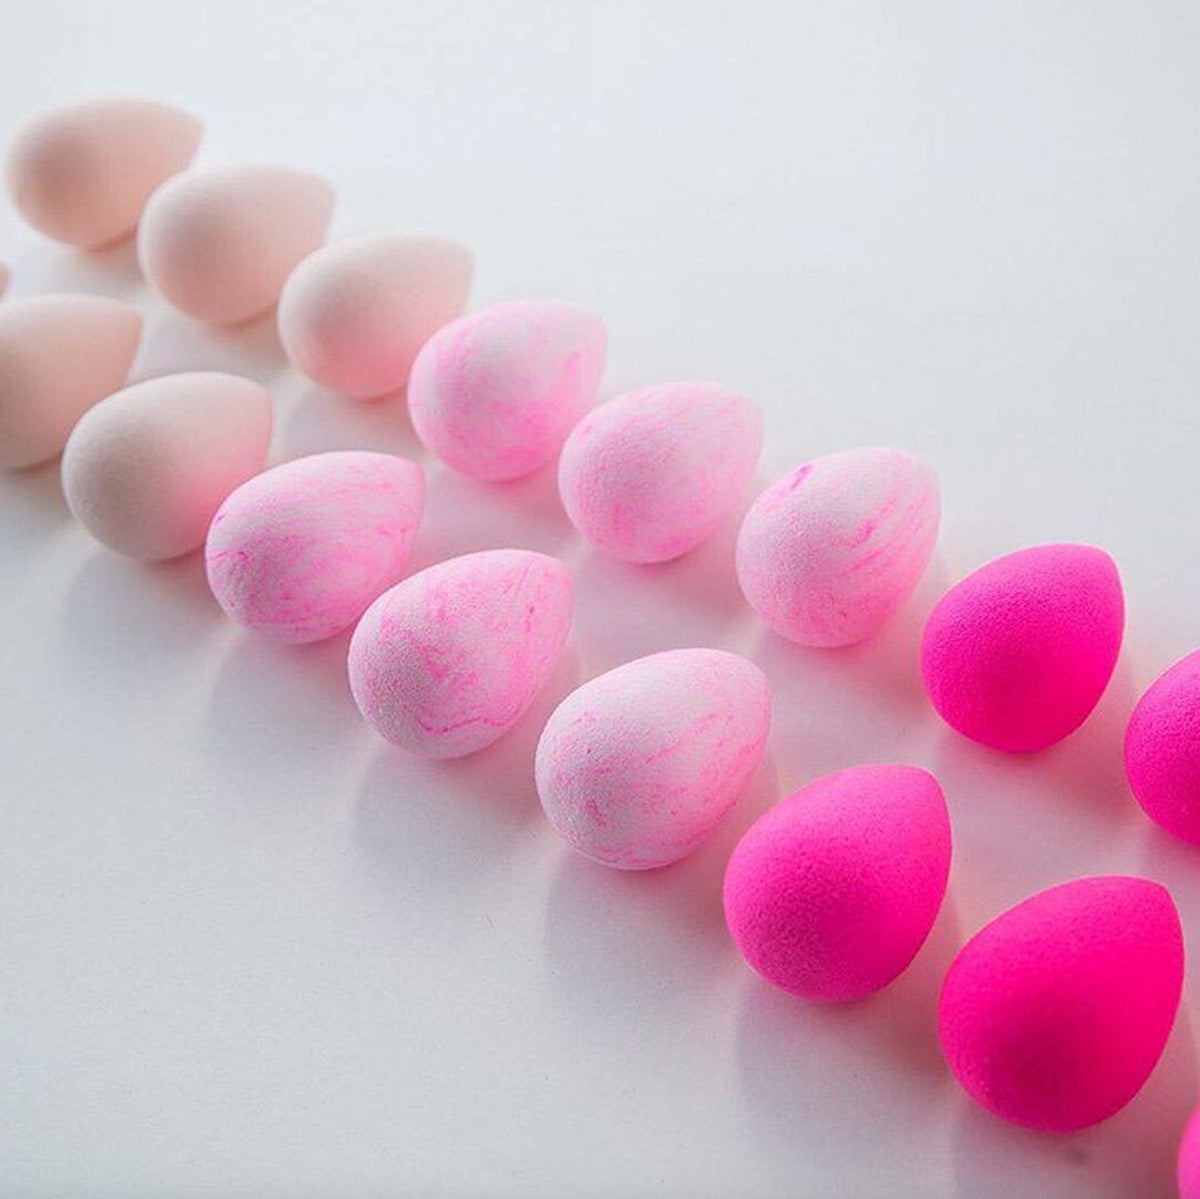 How to Properly Clean Your Beloved Beautyblender
